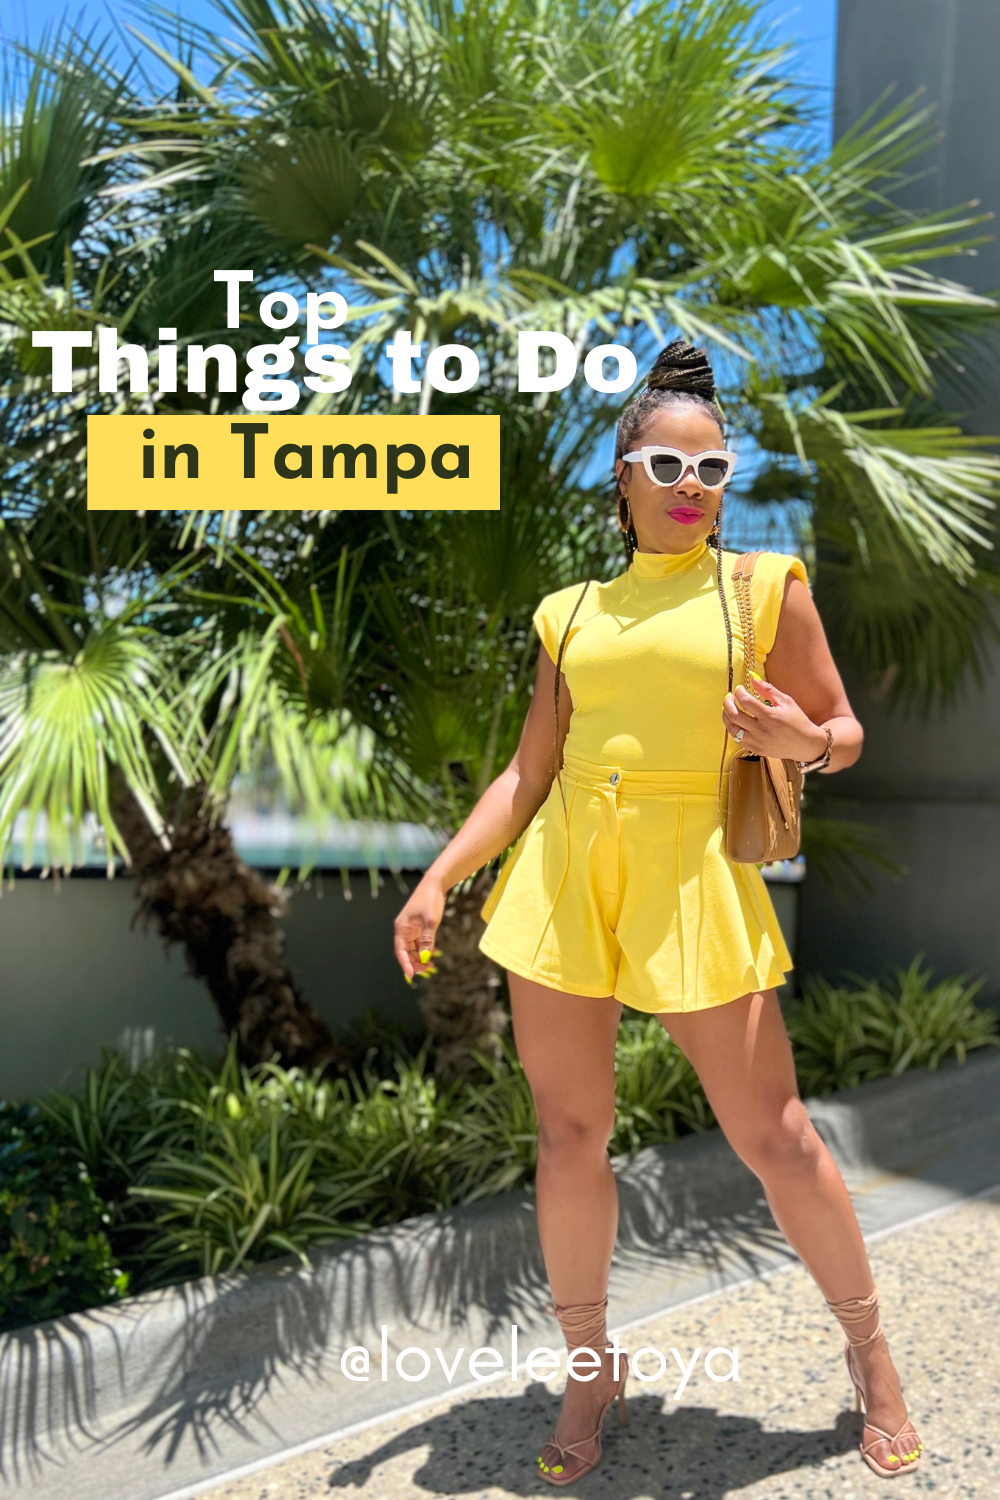 Top Things to do in Tampa